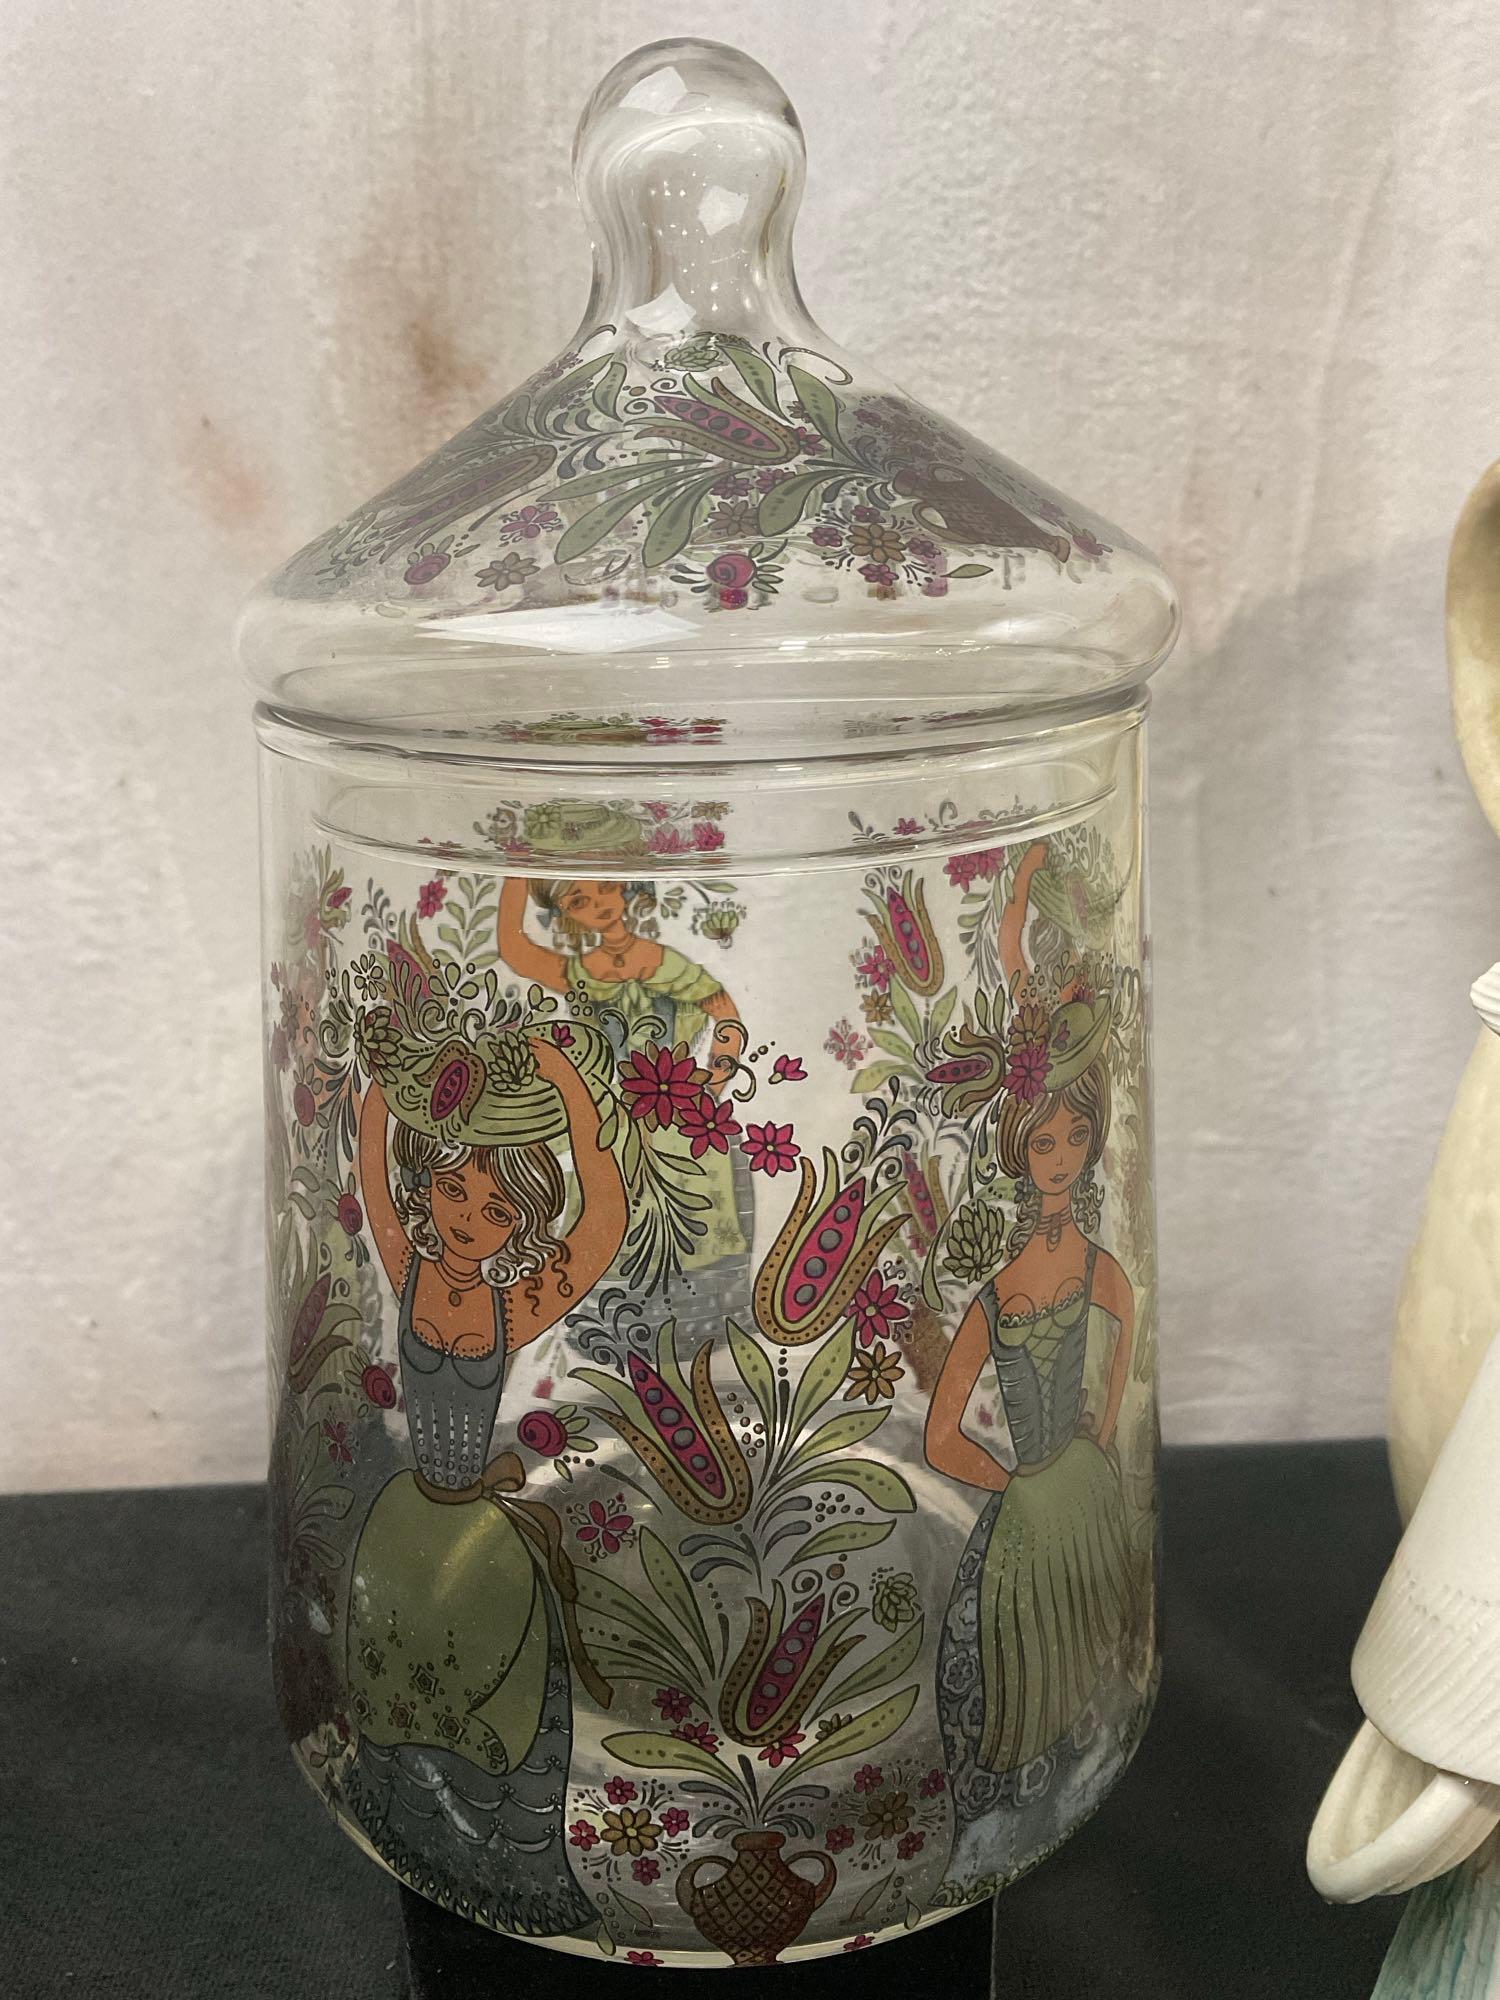 Handcrafted Nun Figure, Clear Candy Jar w/ handpainted designs, & Terracotta Pitcher w/ Rooster